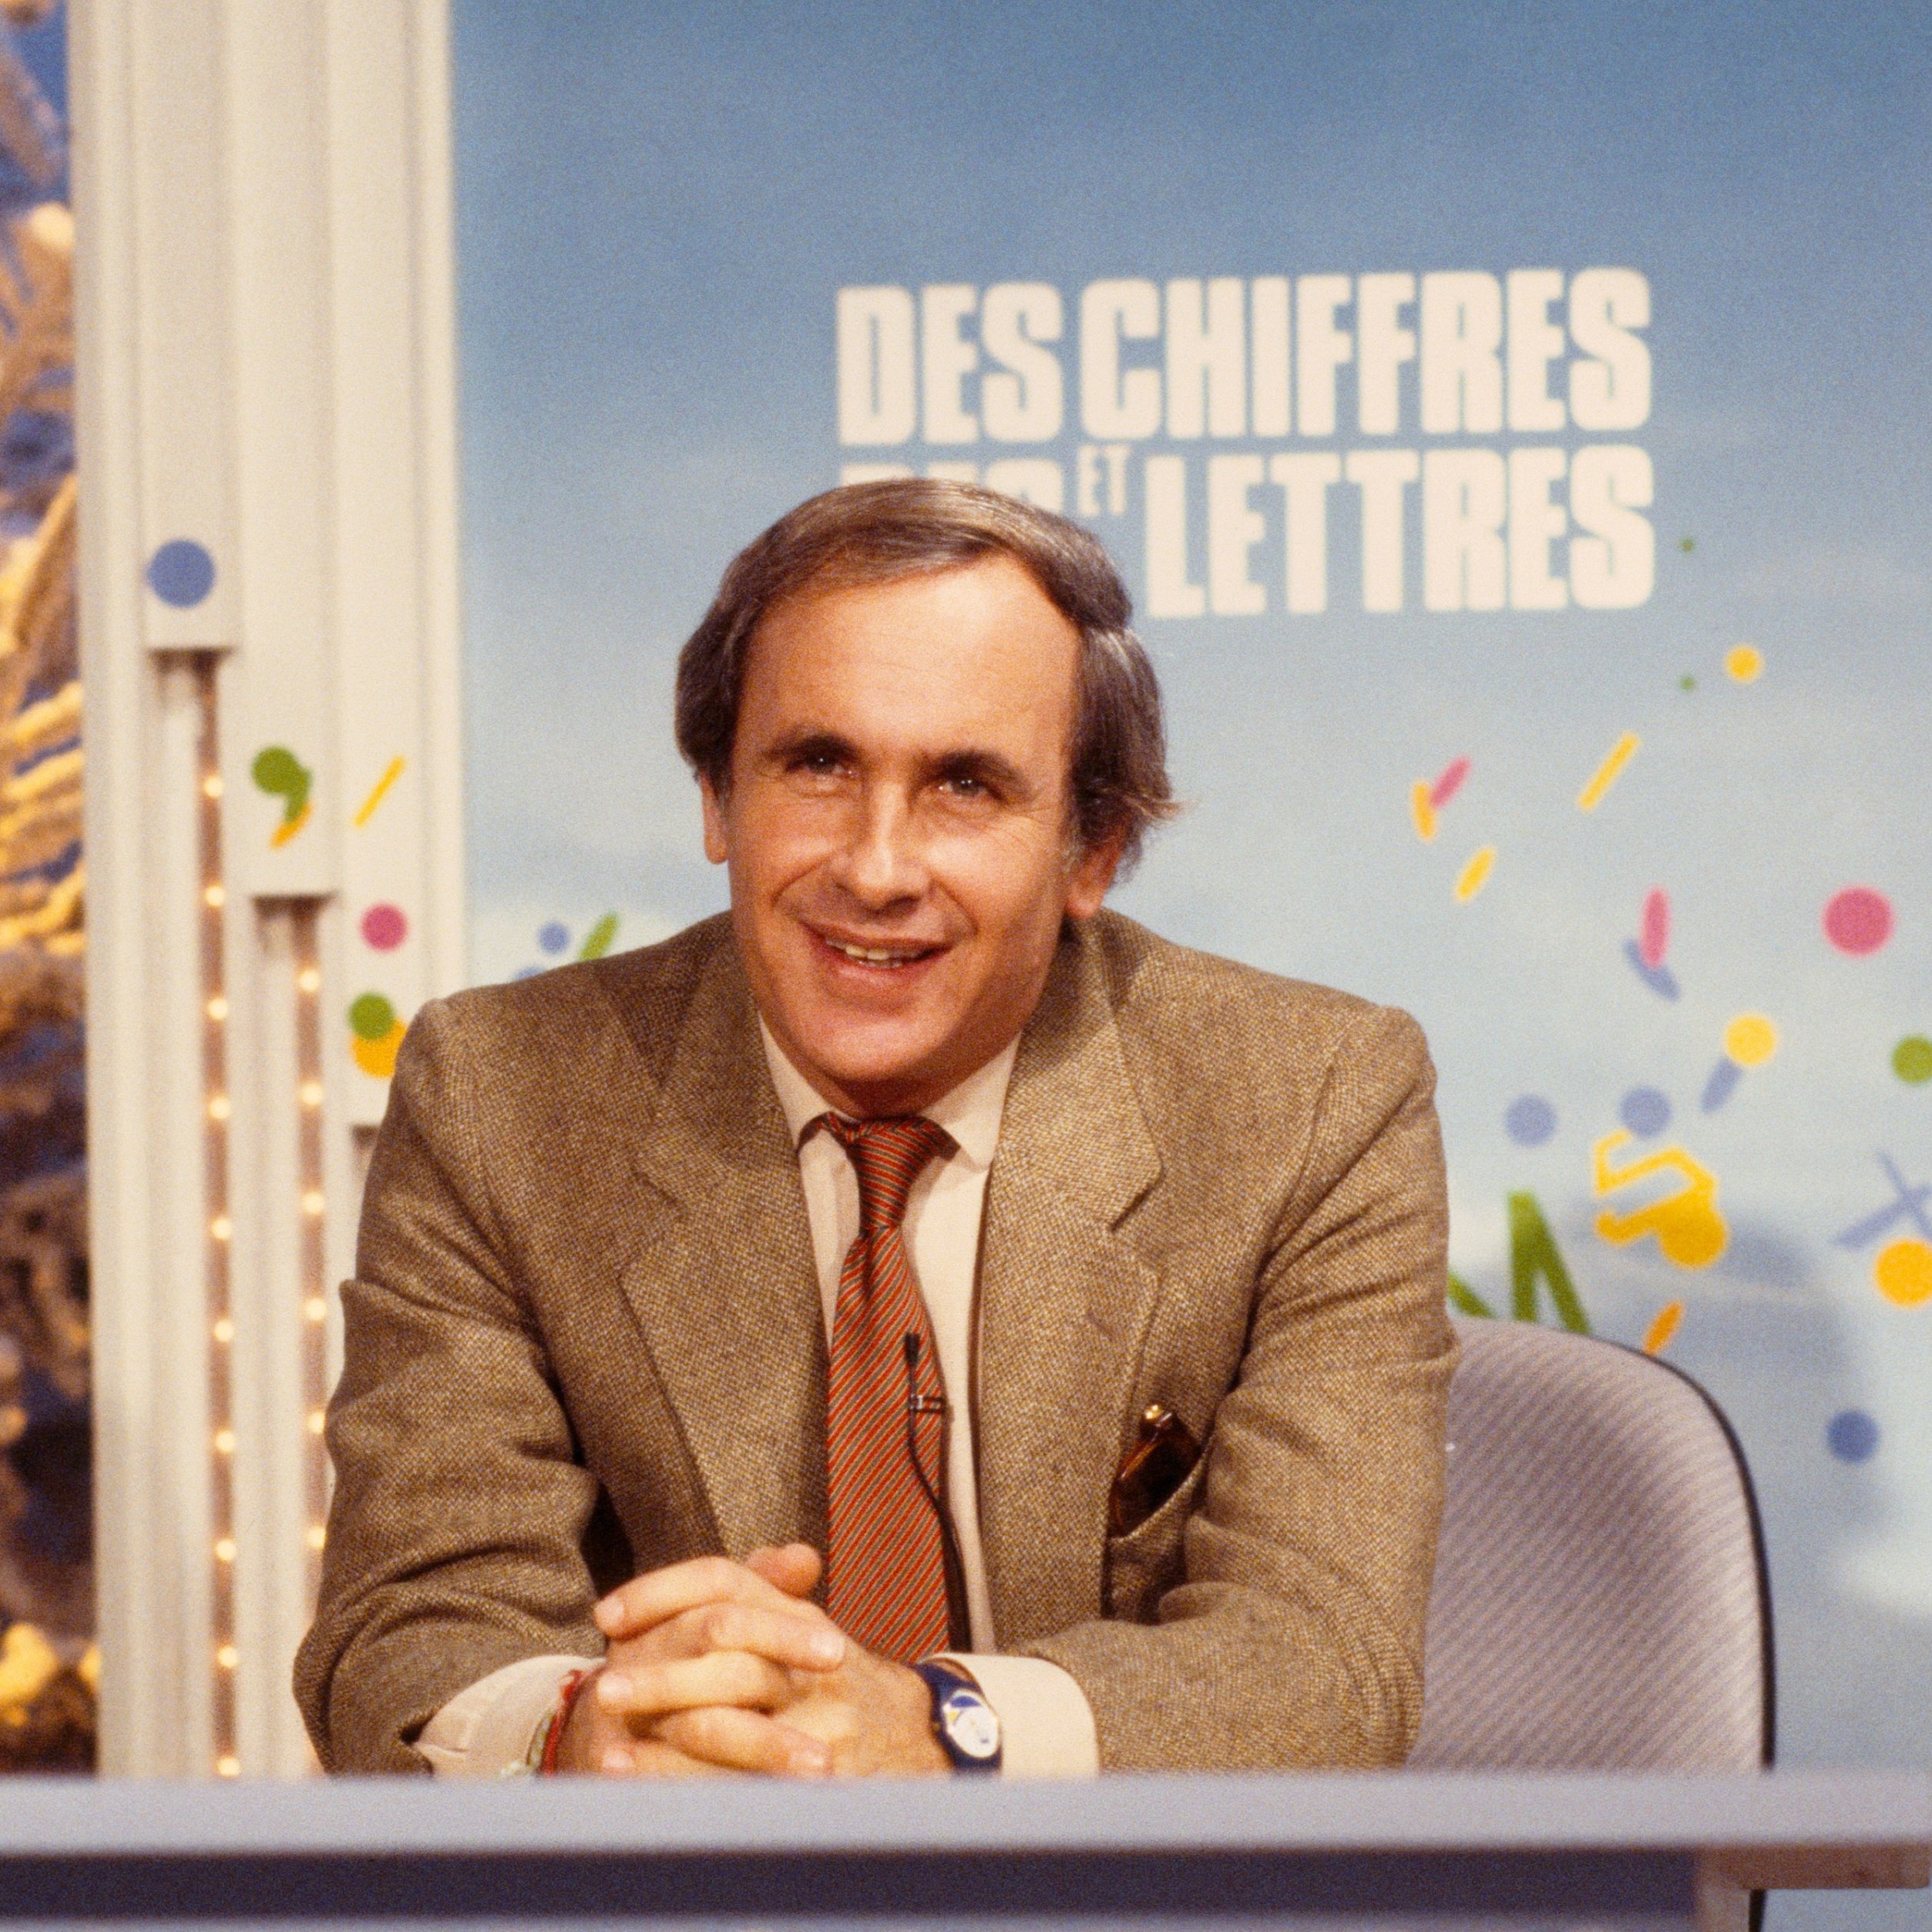 Patrice Laffont was the original presenter of the game show, Des chiffres et des lettres, which began in 1972 and inspired Countdown